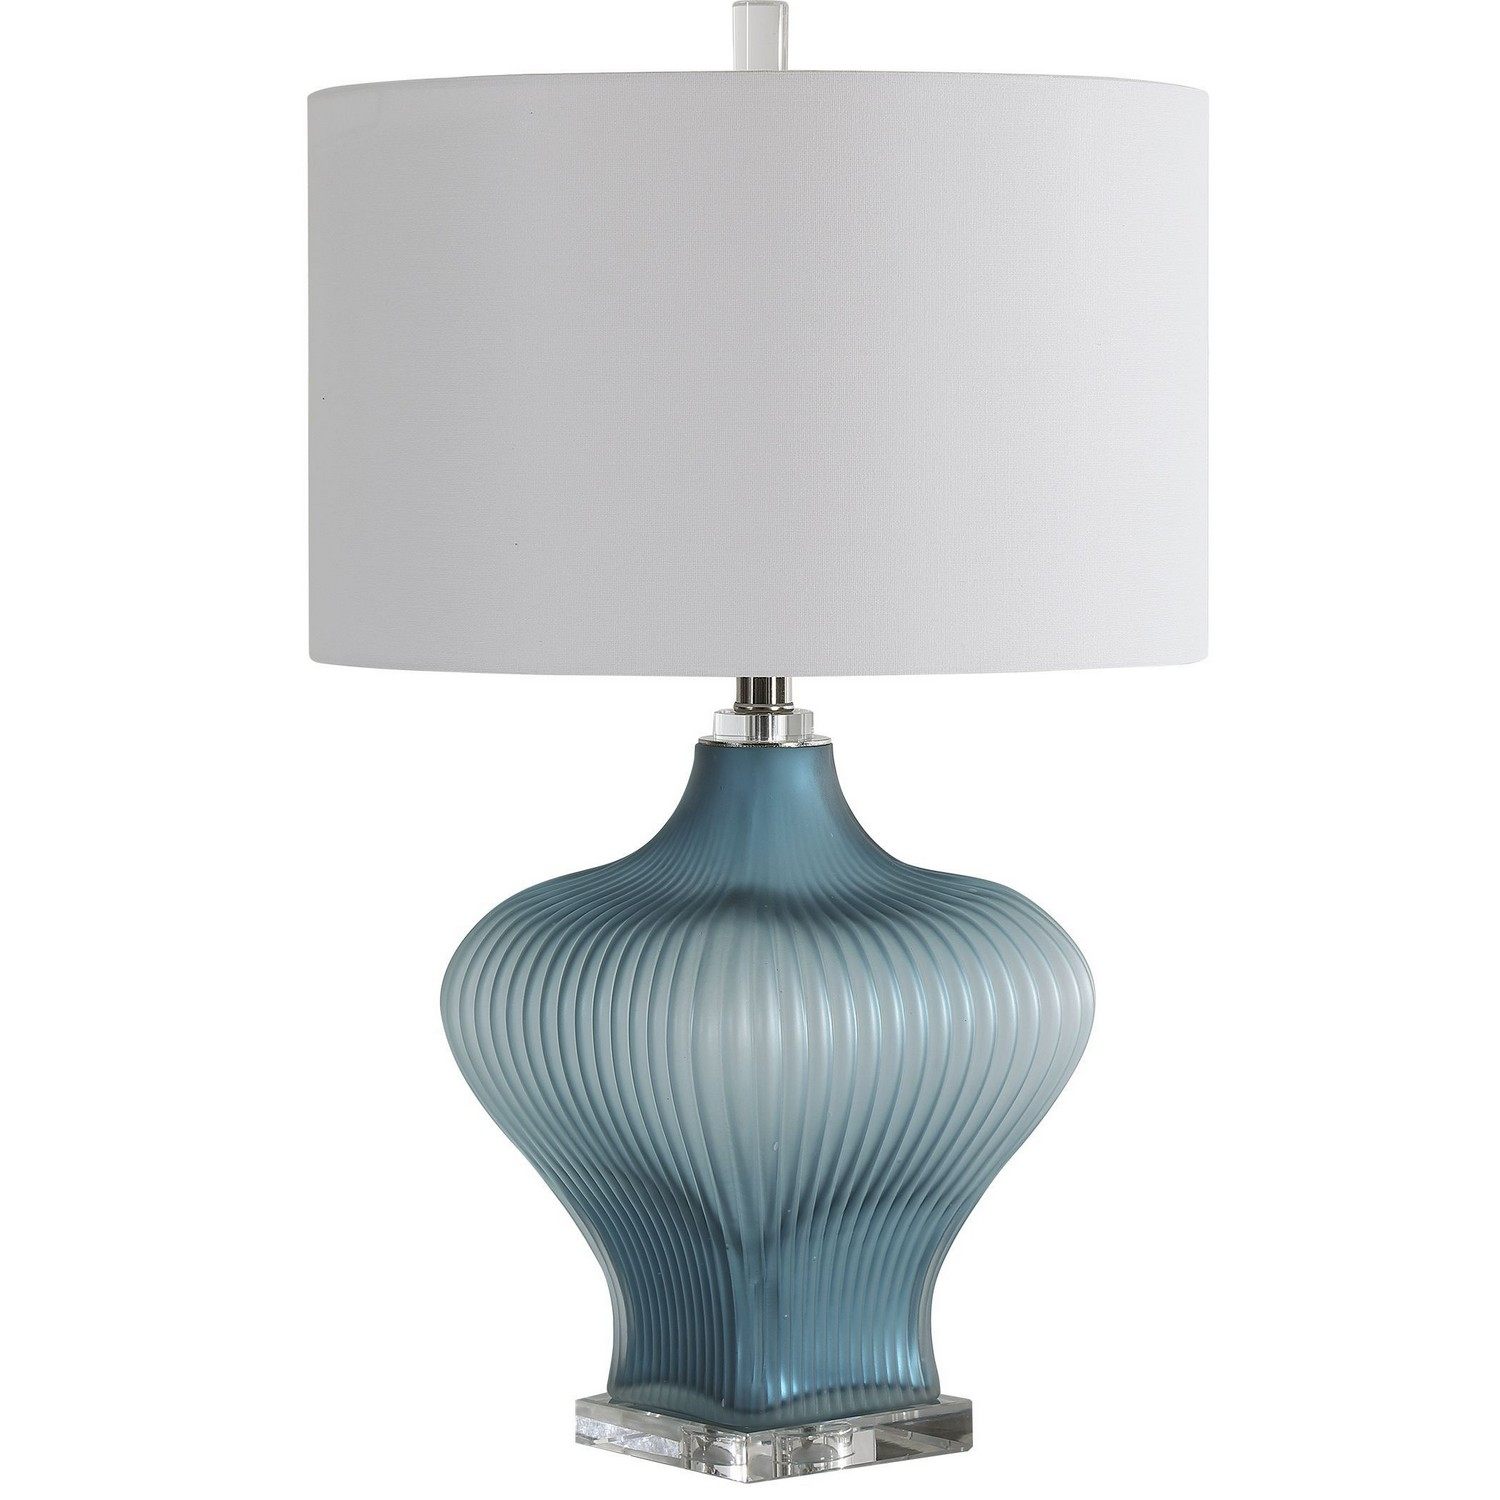 Uttermost Marjorie Frosted Table Lamp - Turquoise